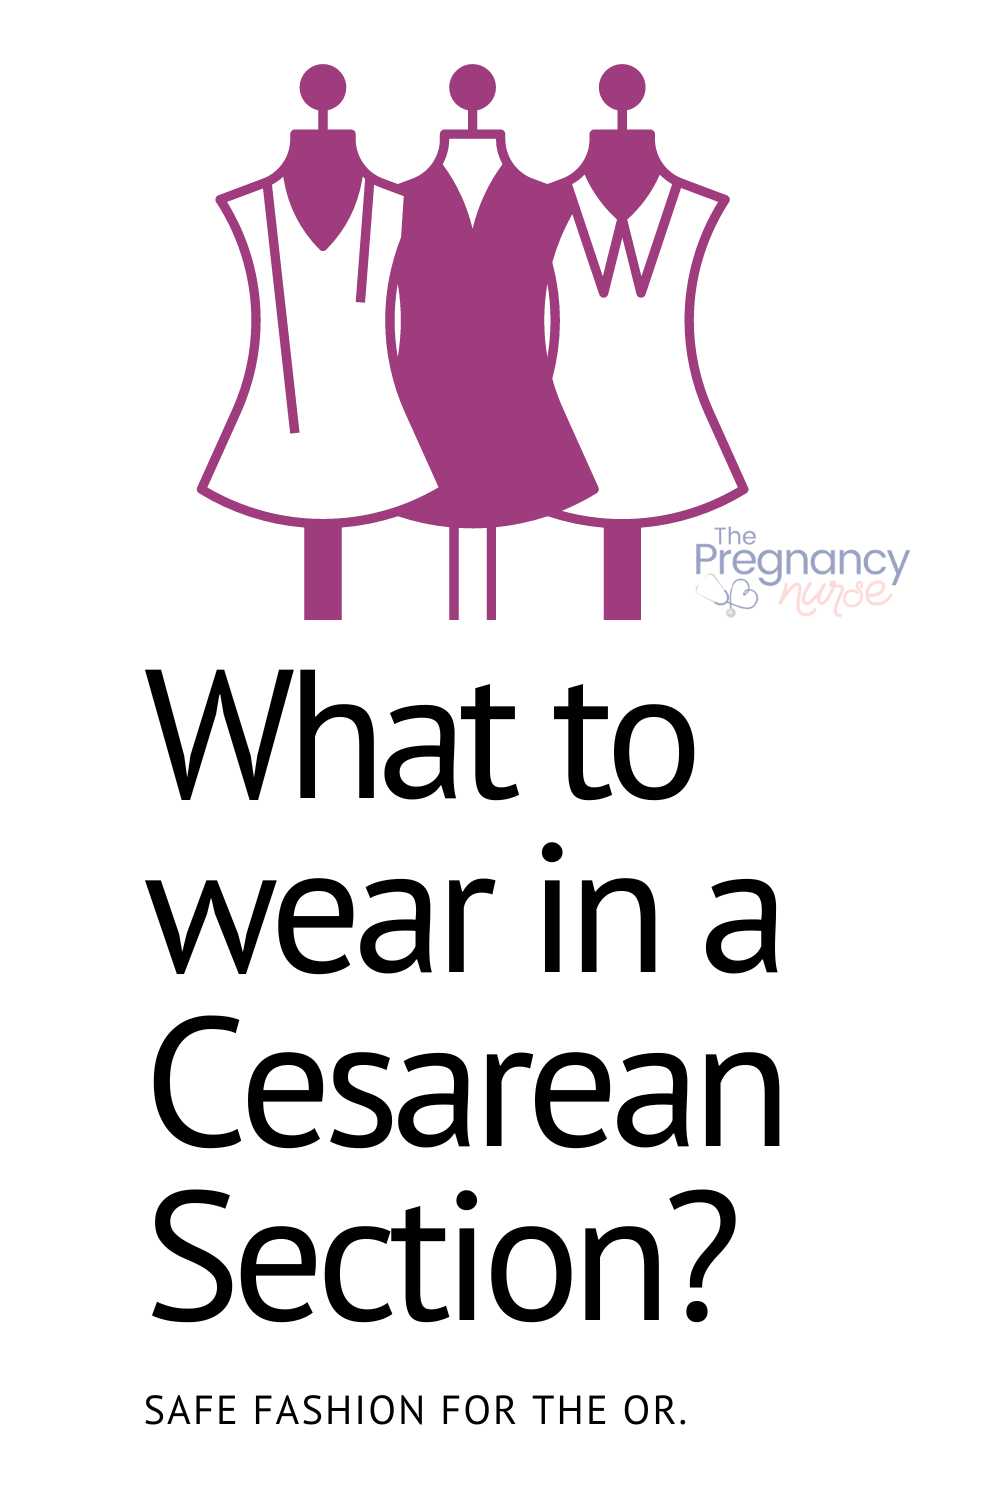 3 gowns -- what to wear in a cesarean section? Safe fashion for the OR